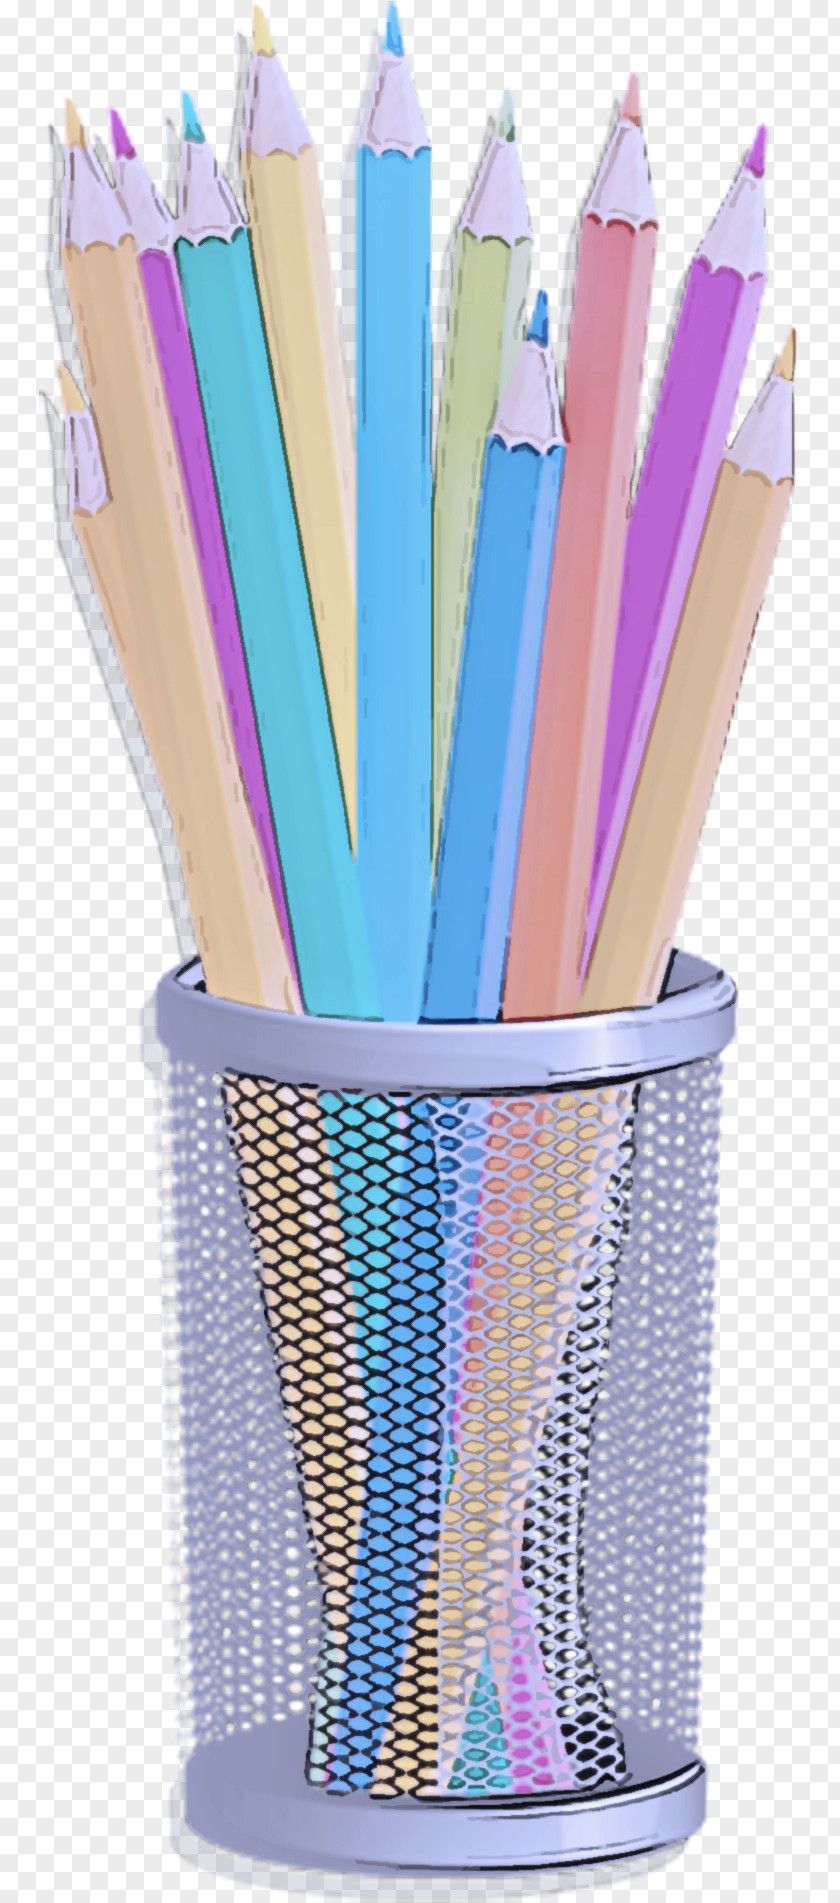 Pencil Case Drinking Straw Stationery Writing Implement PNG